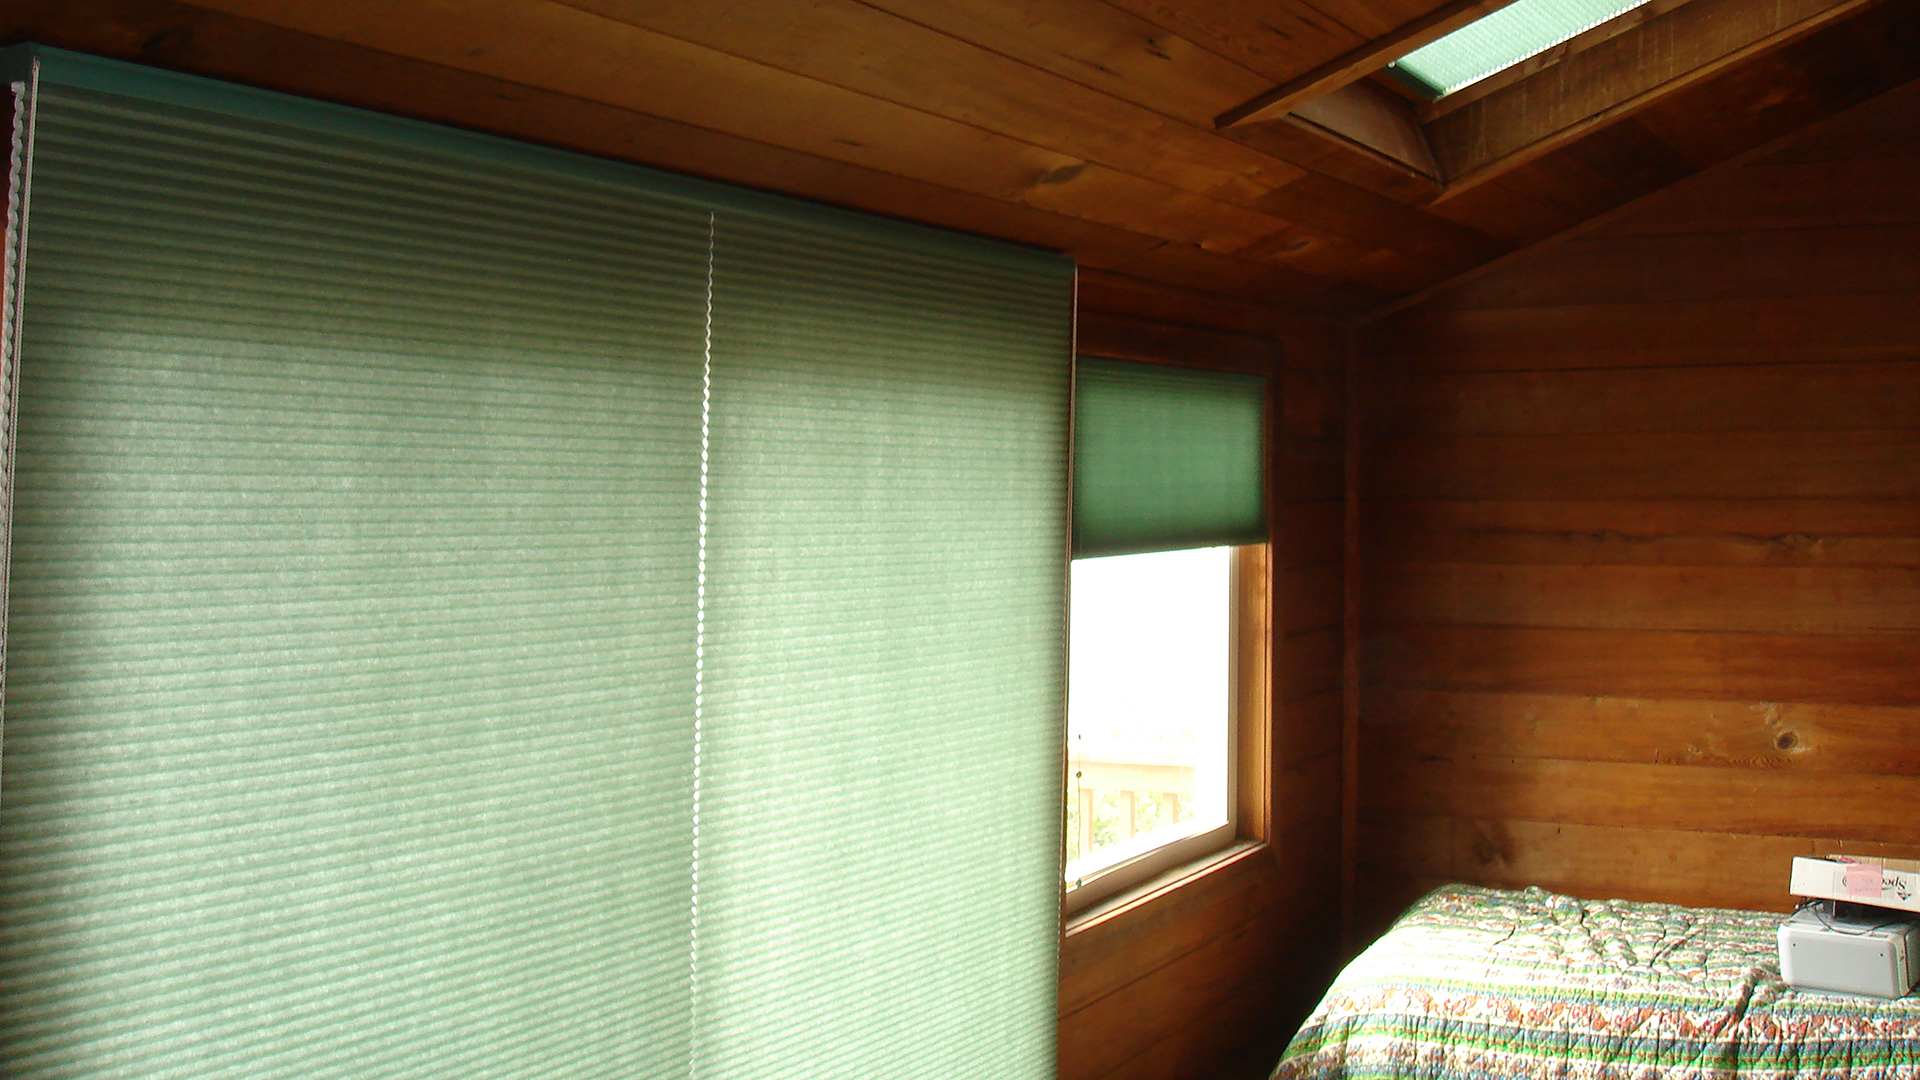 Woven Wood Shade with Trim Beads on Valance HD.jpg